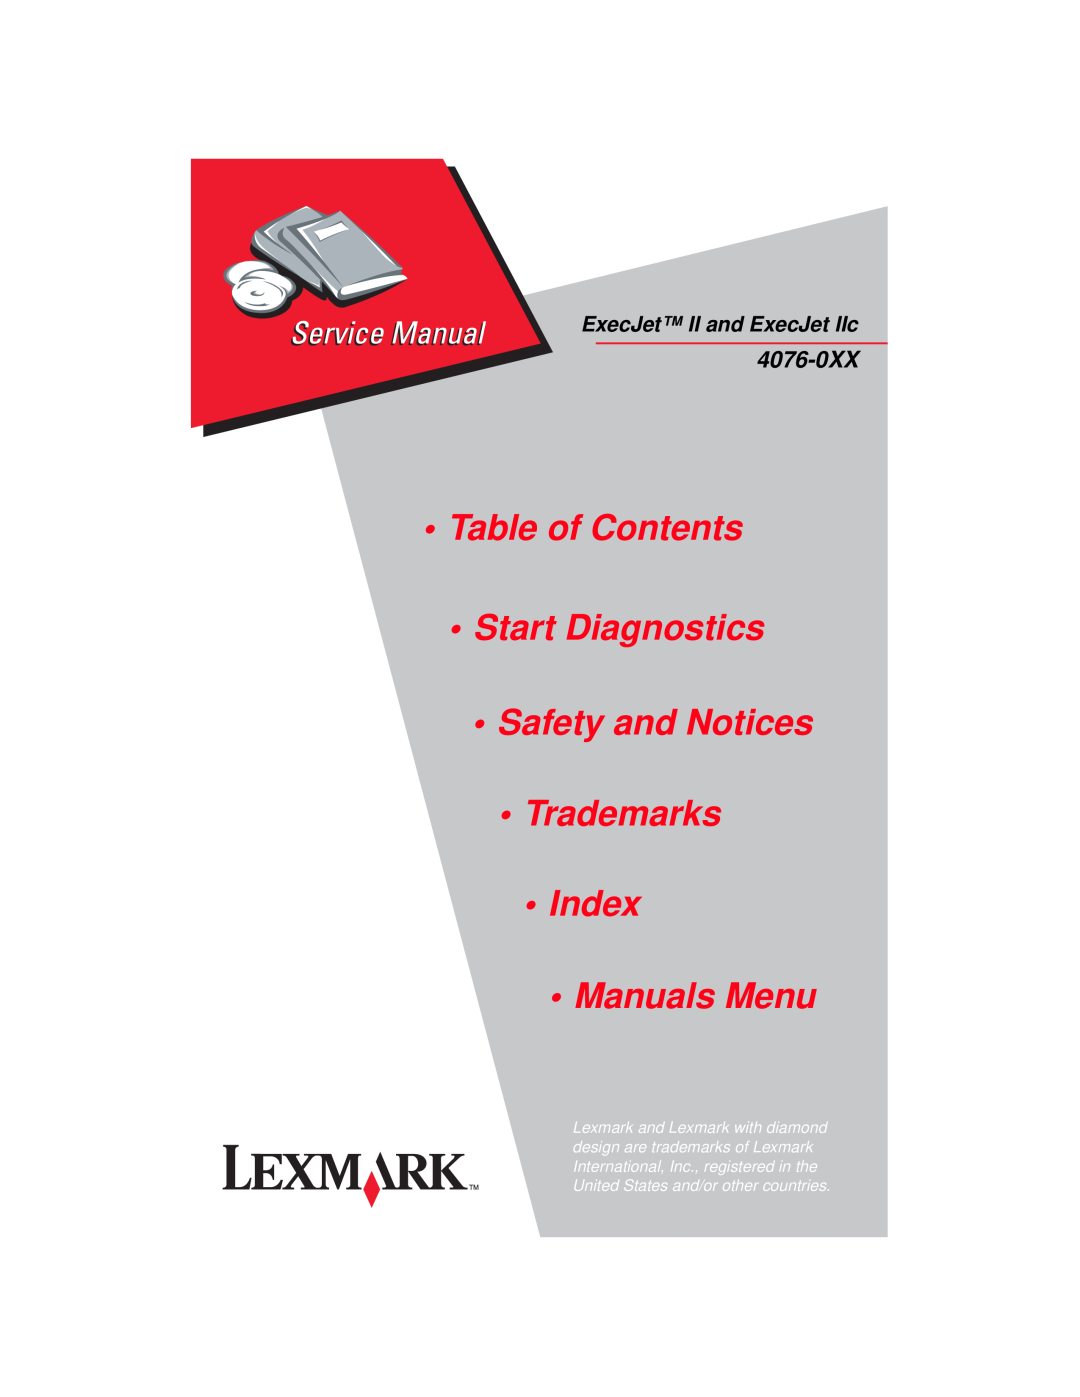 Lexmark 4076-0XX manual •Table of Contents •Start Diagnostics, •Safety and Notices •Trademarks •Index, •Manuals Menu 